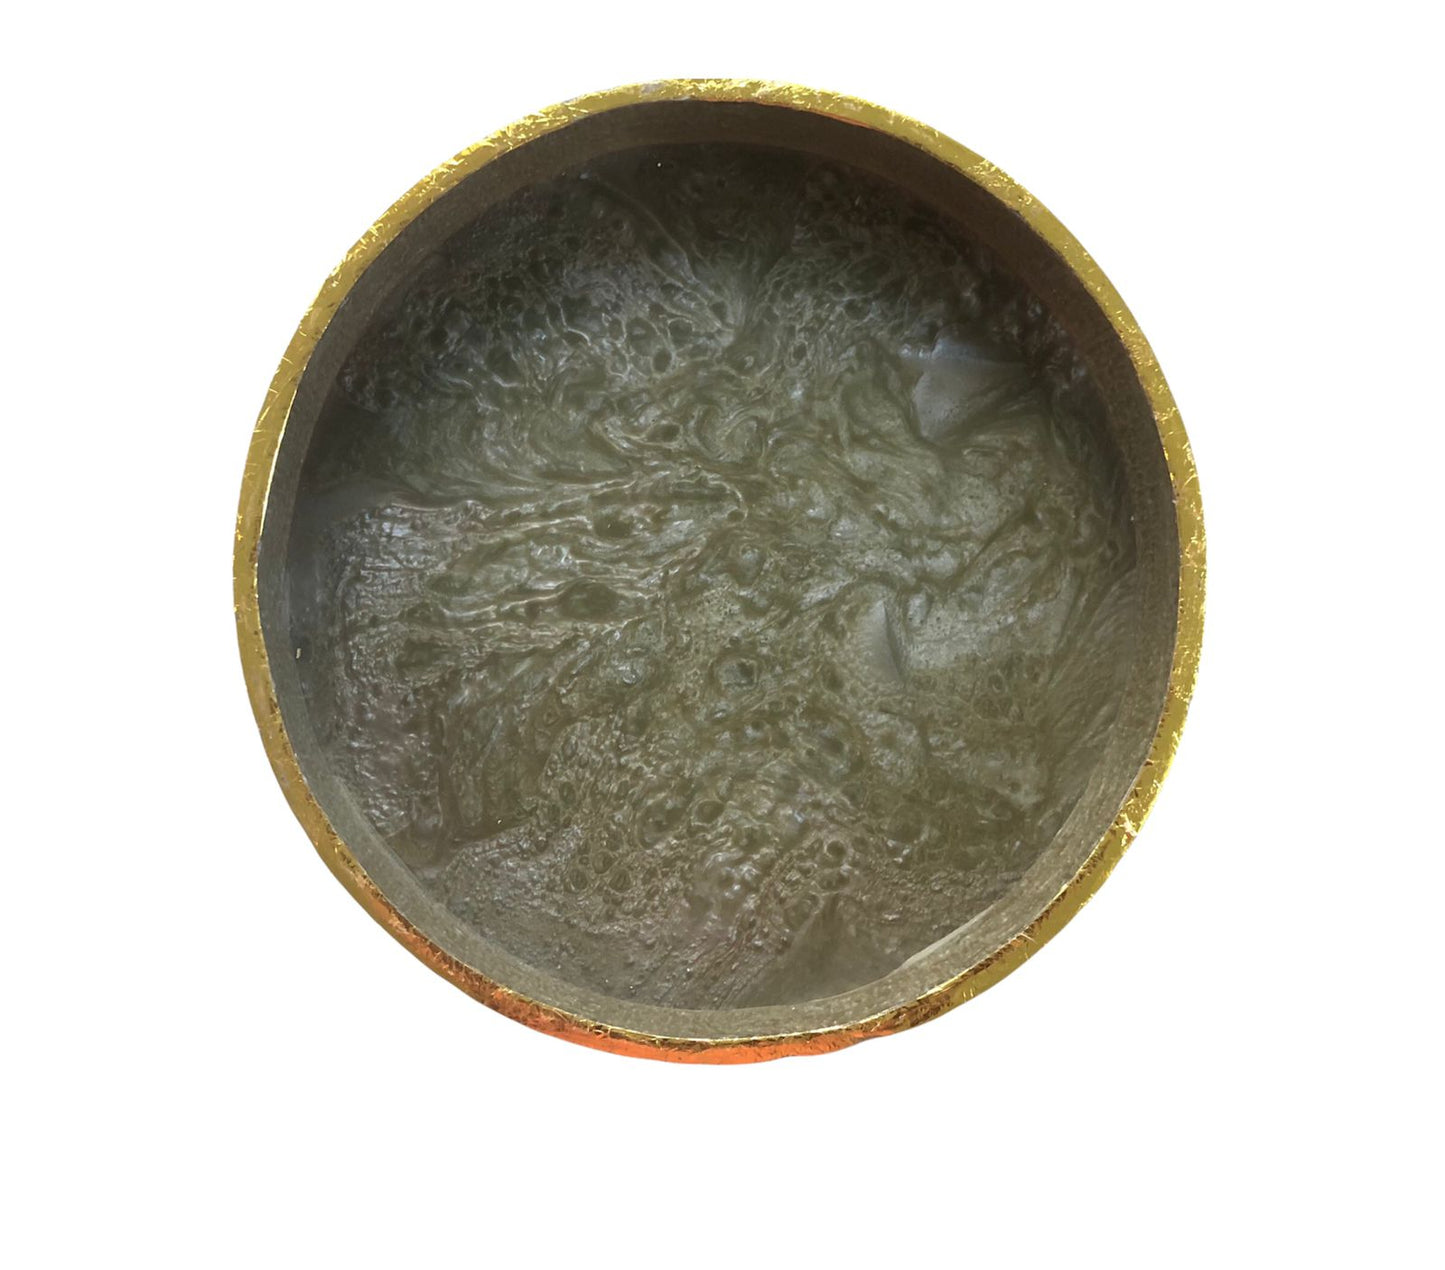 Brown Resin Round Serving Tray